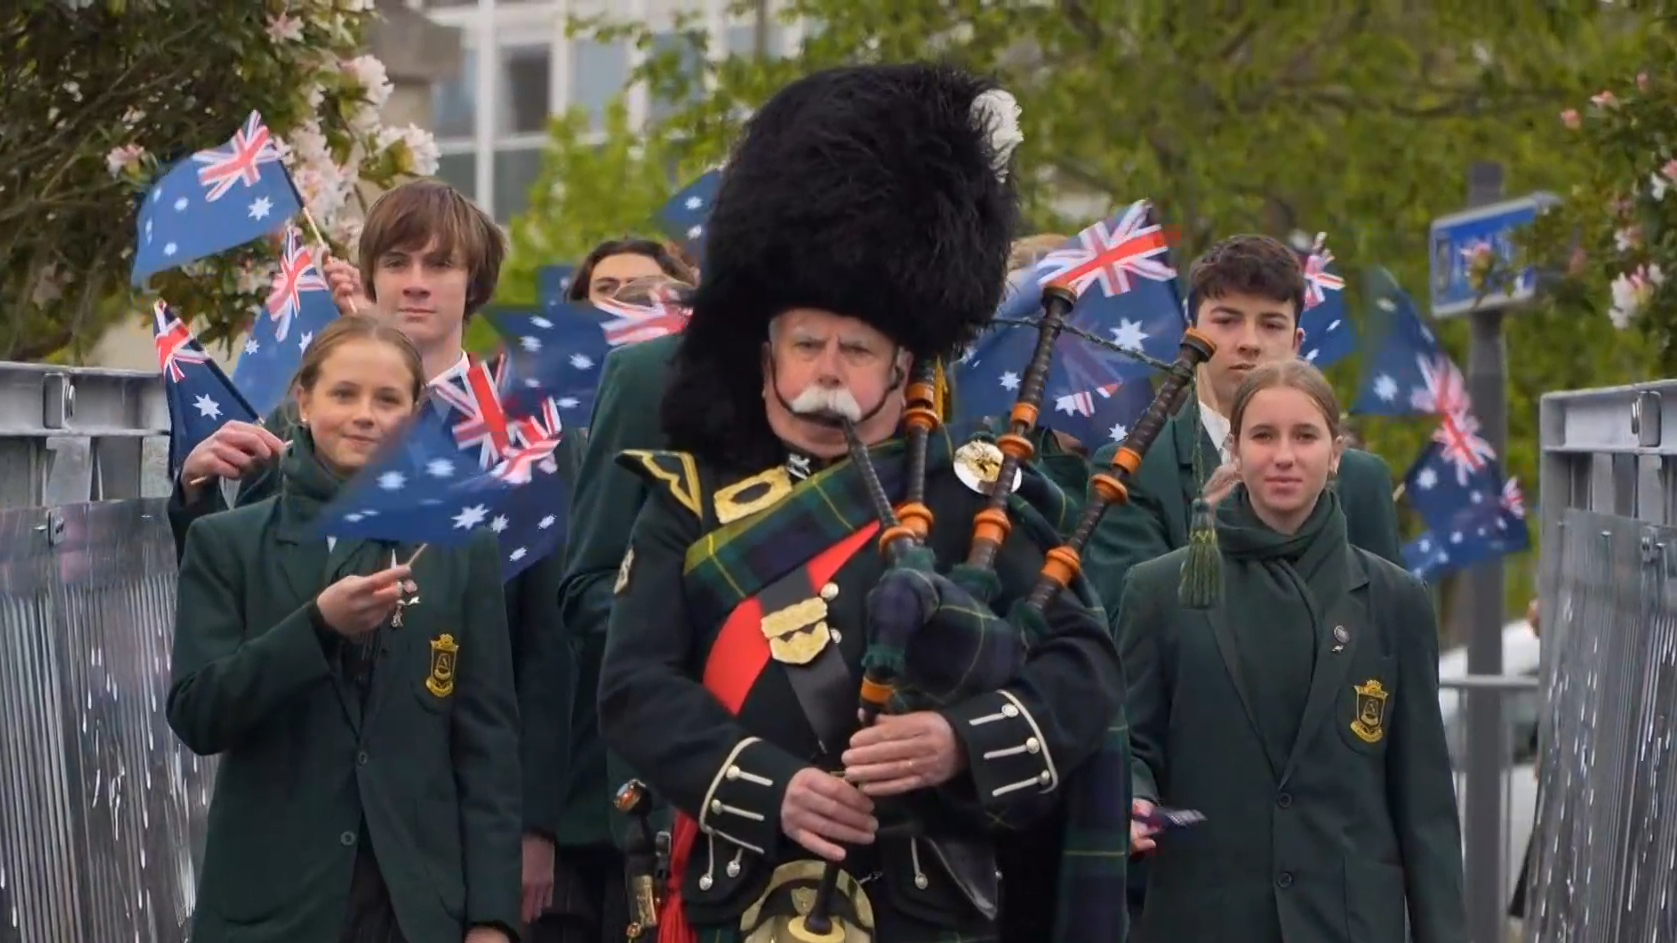 Crowds form at Gallipoli in honour of Anzacs